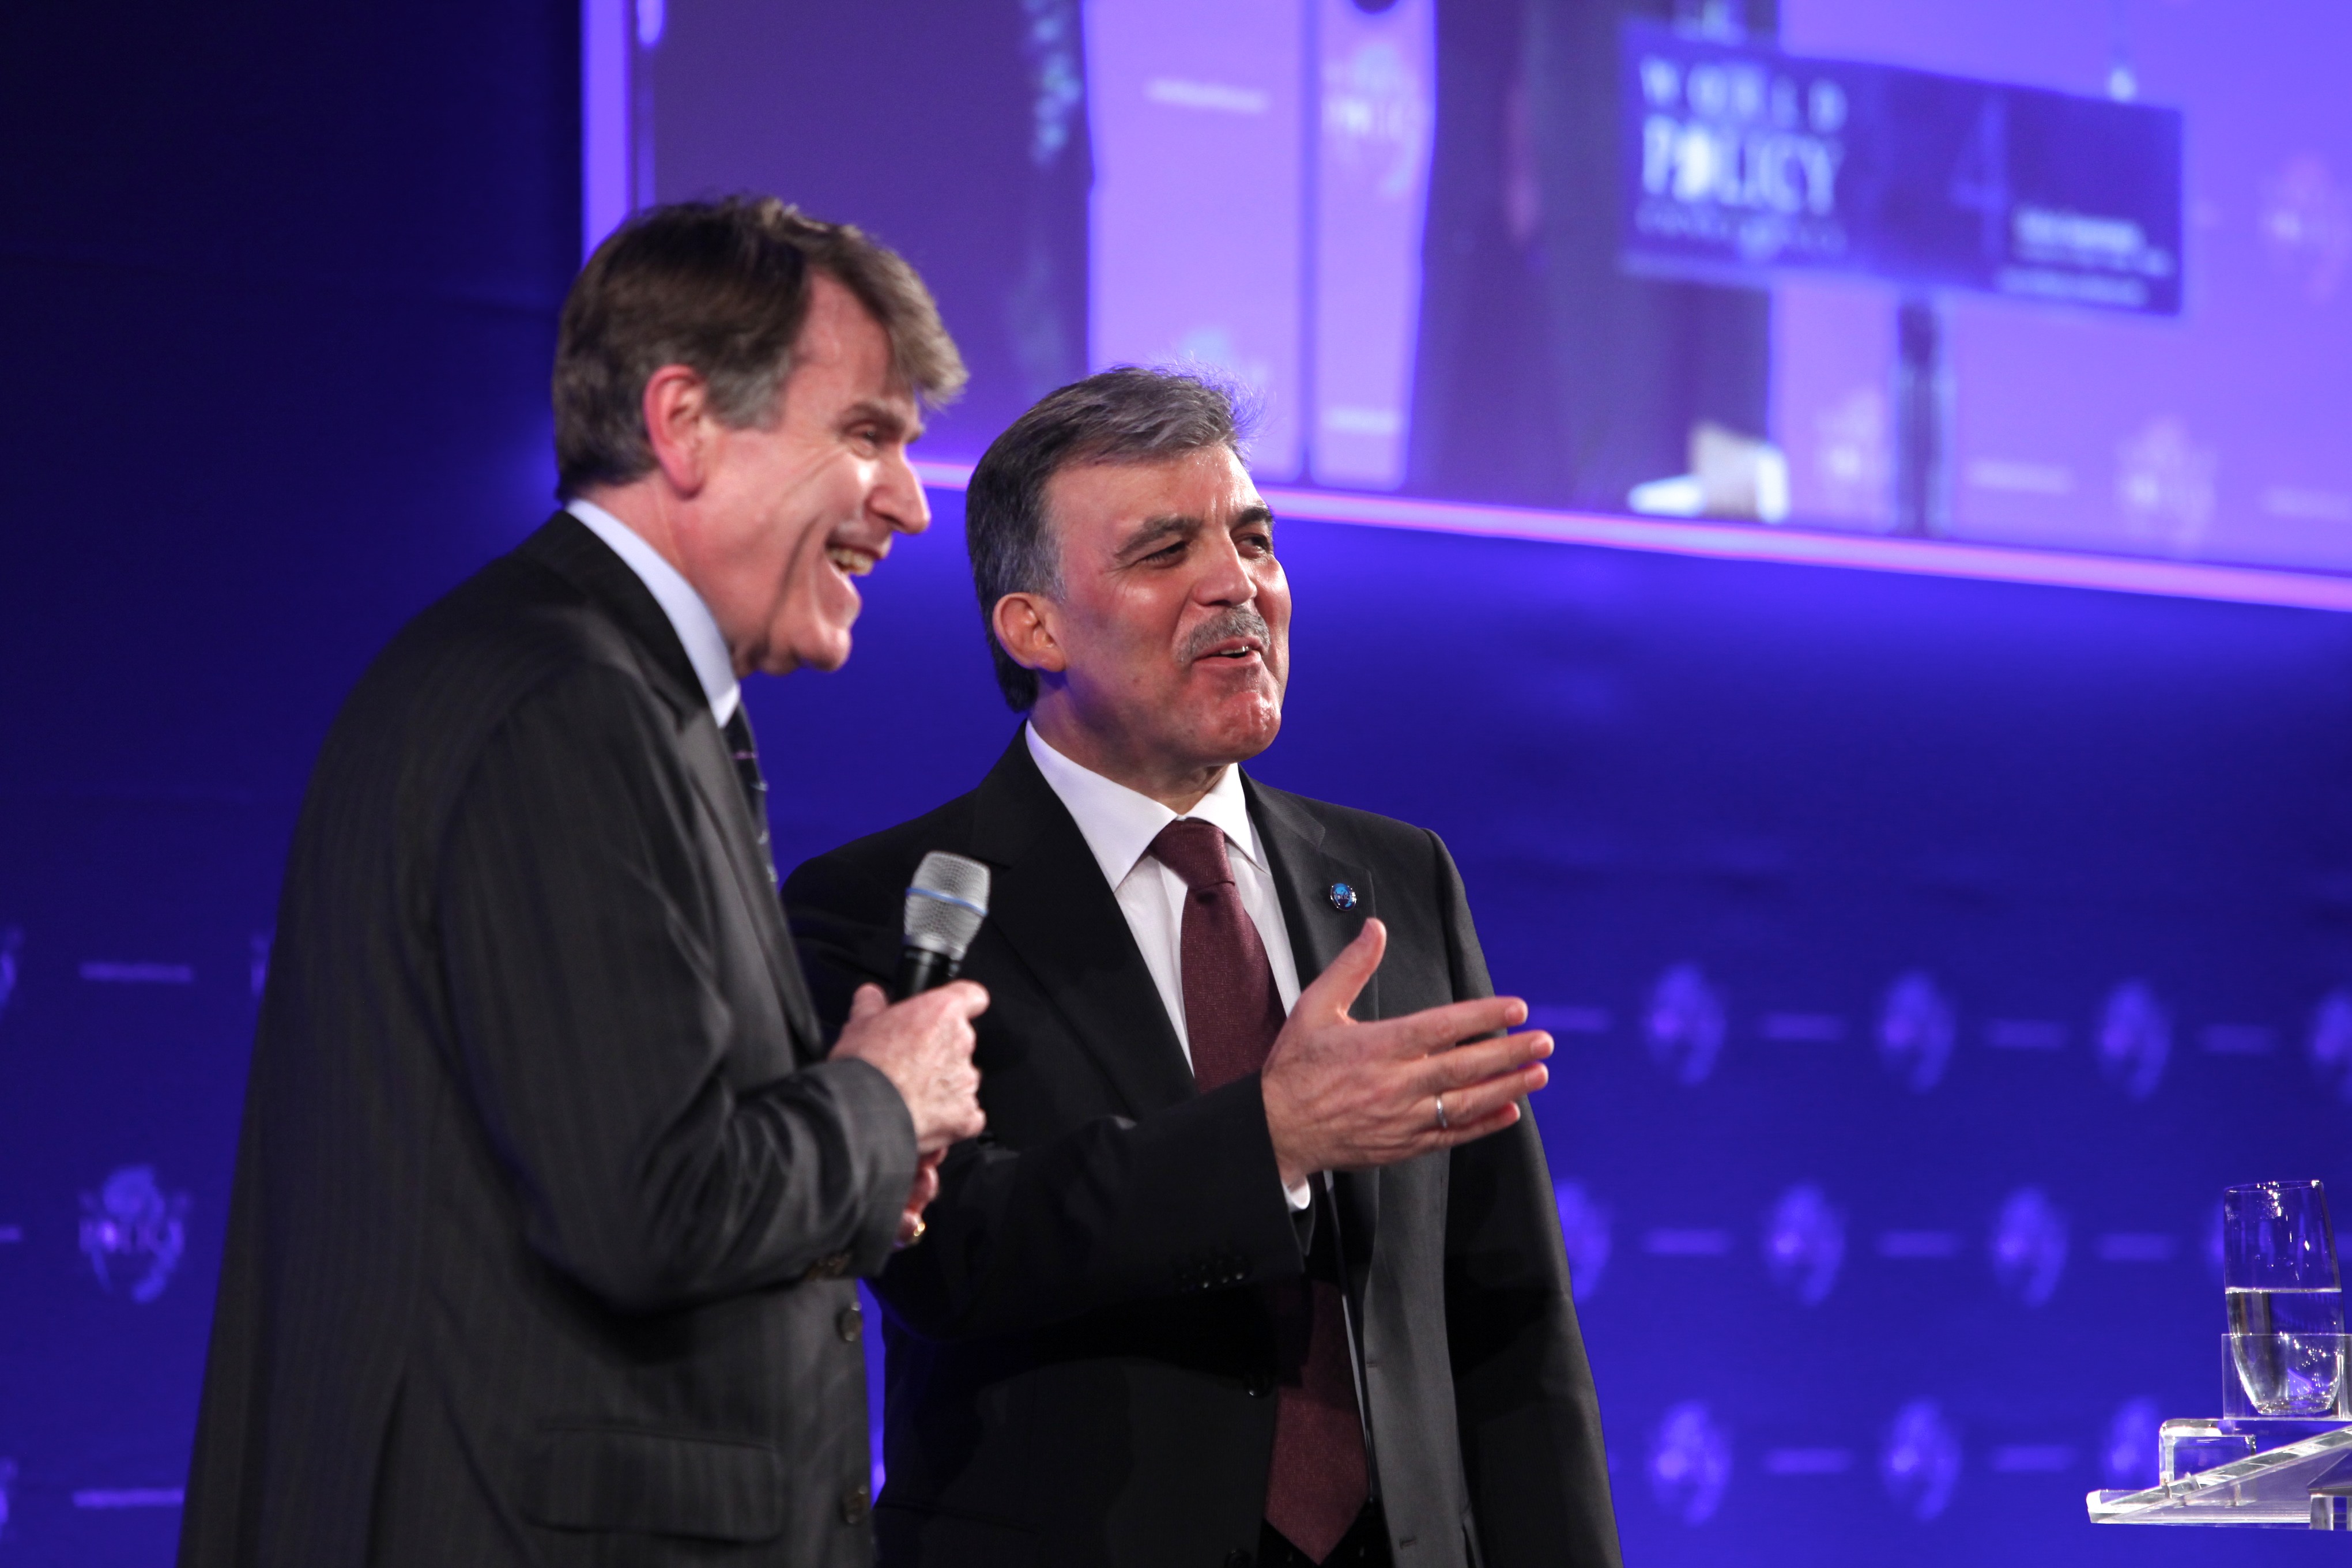 World Policy Conference WPC 2011, Thierry de Montbrial, Abdullah Gül